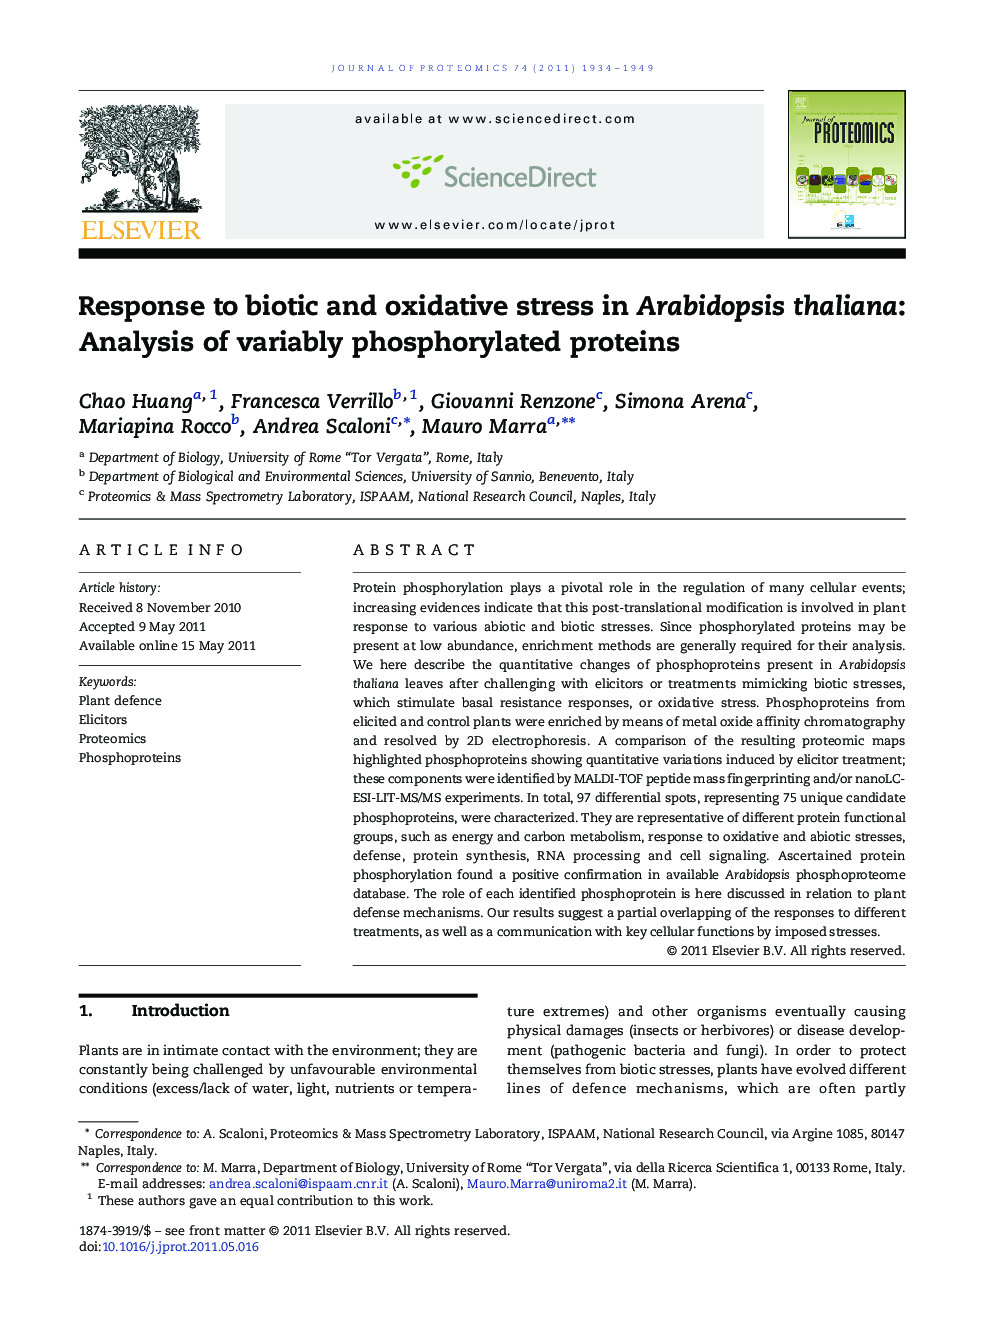 Response to biotic and oxidative stress in Arabidopsis thaliana: Analysis of variably phosphorylated proteins